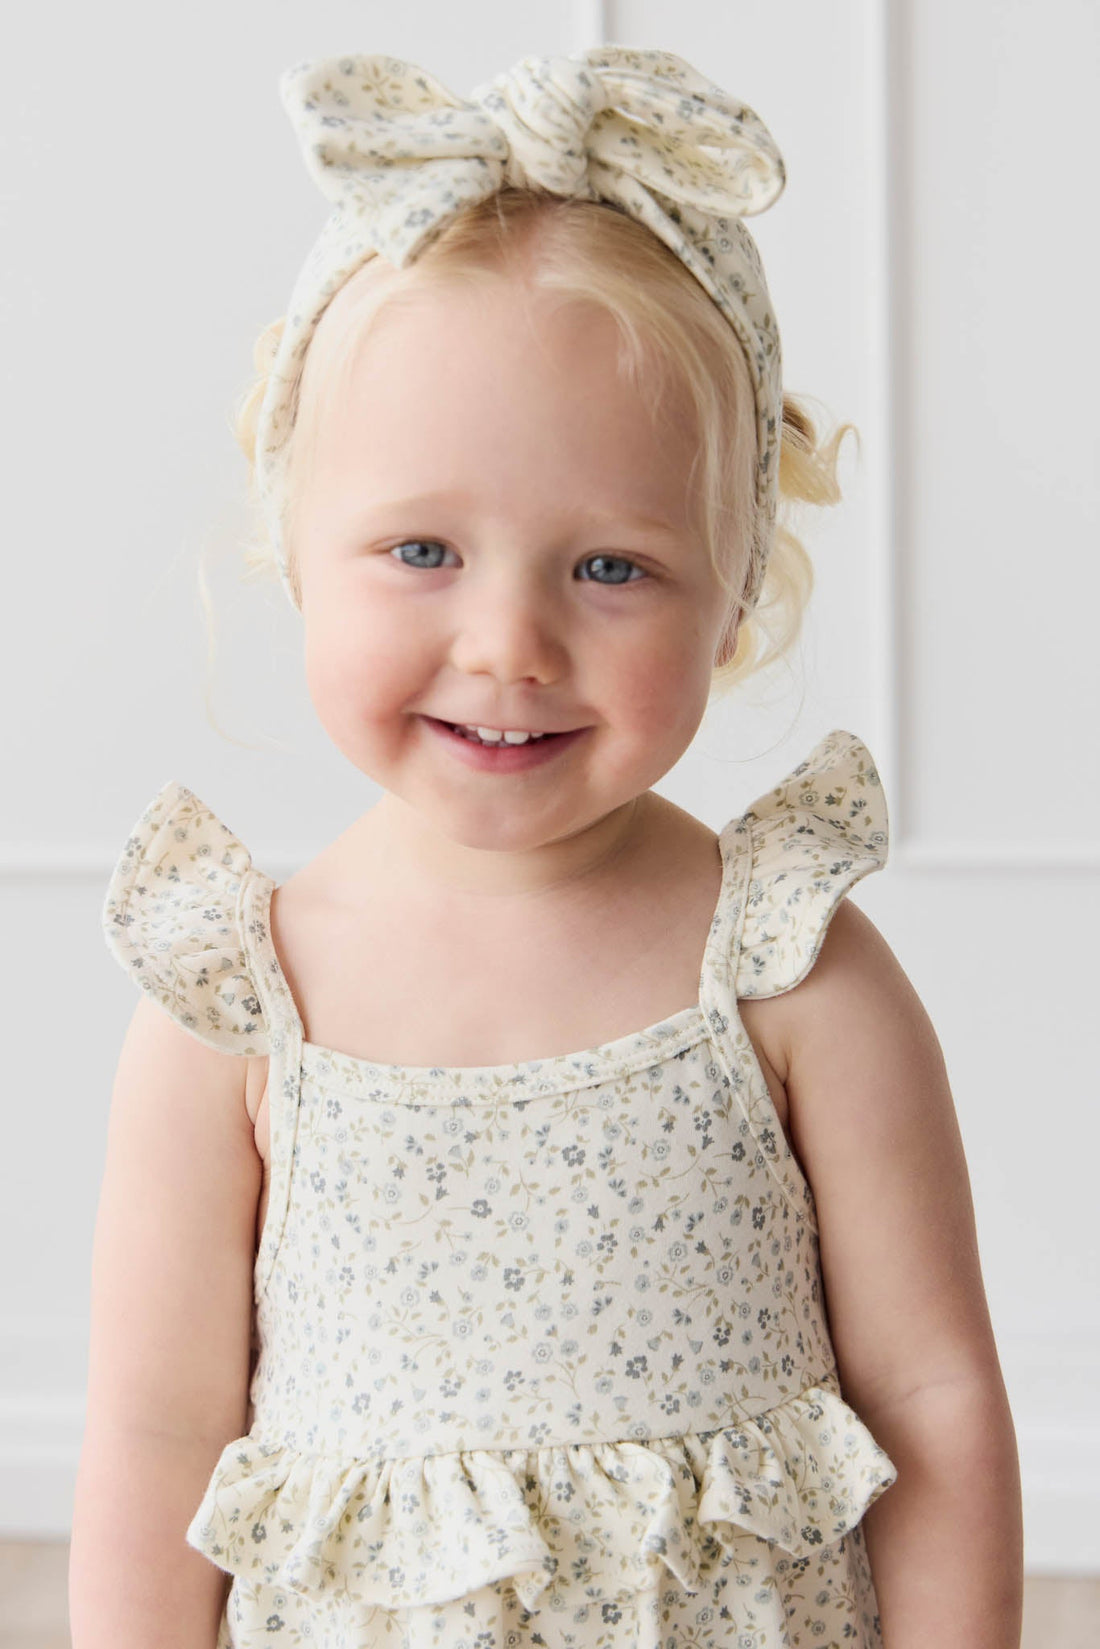 Organic Cotton Kaia Top - Dainty Egret Blues Childrens Top from Jamie Kay USA